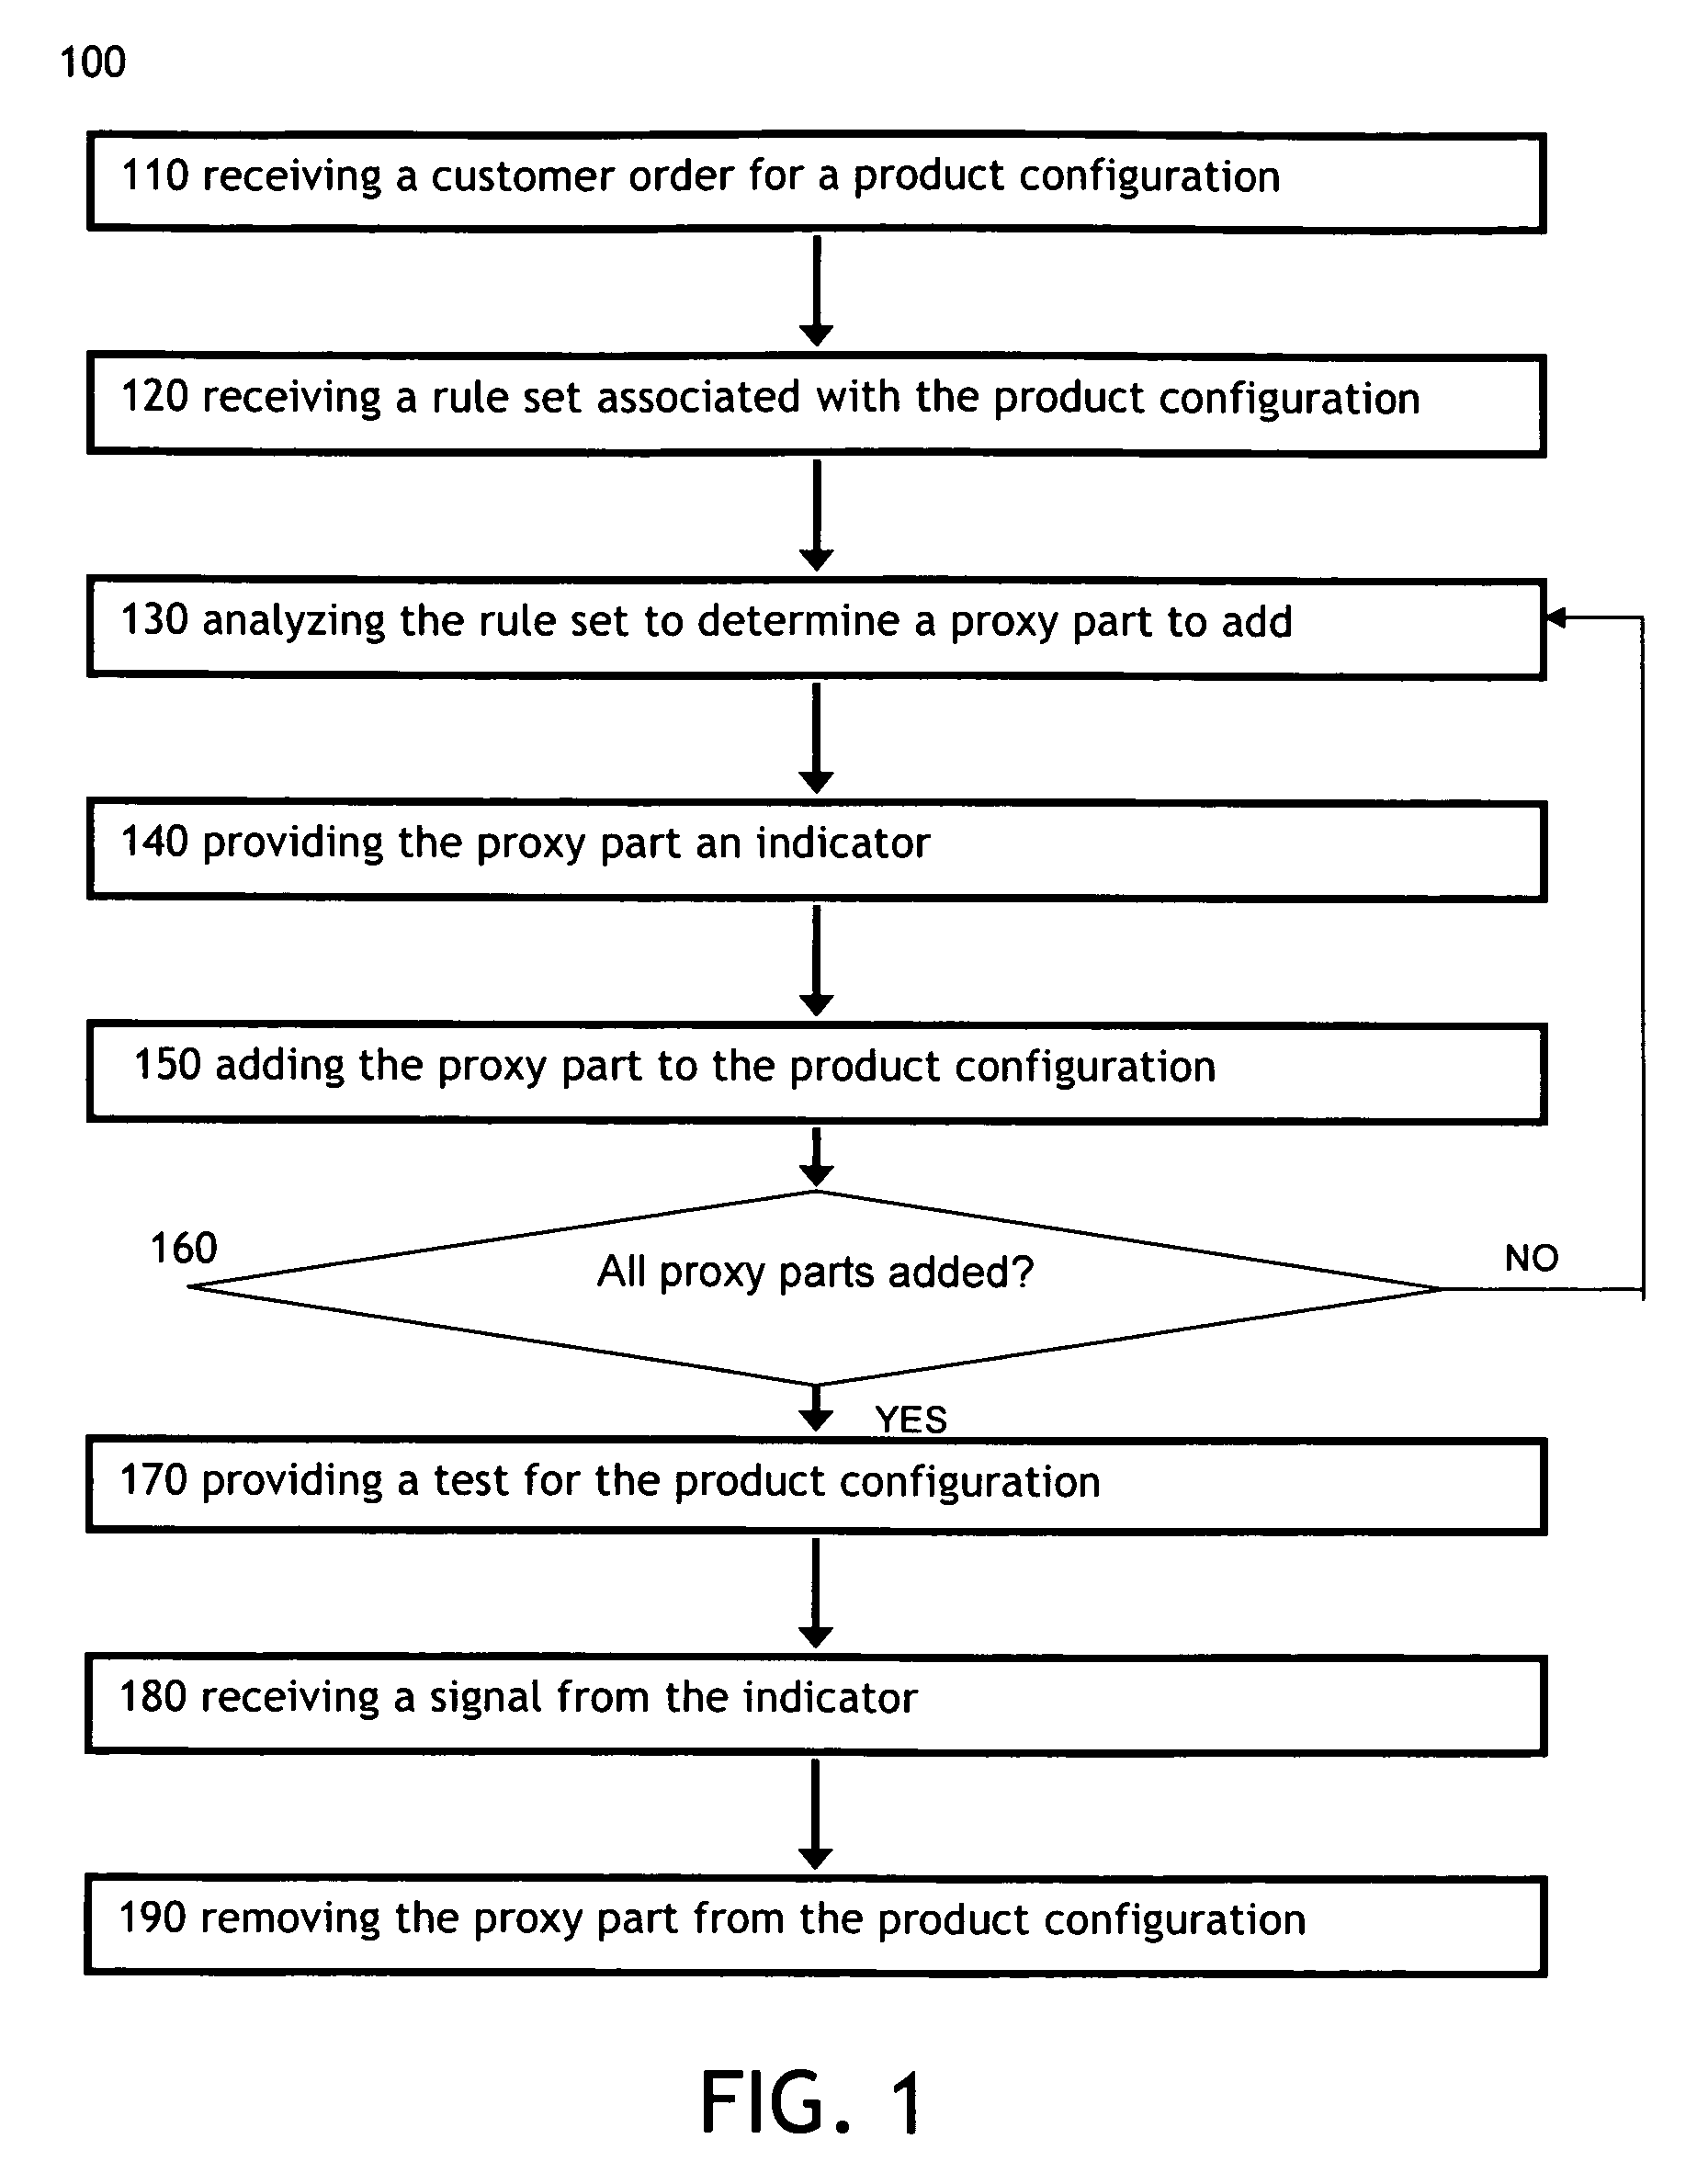 Dynamic determination of a minimal configured product to achieve desired test coverage